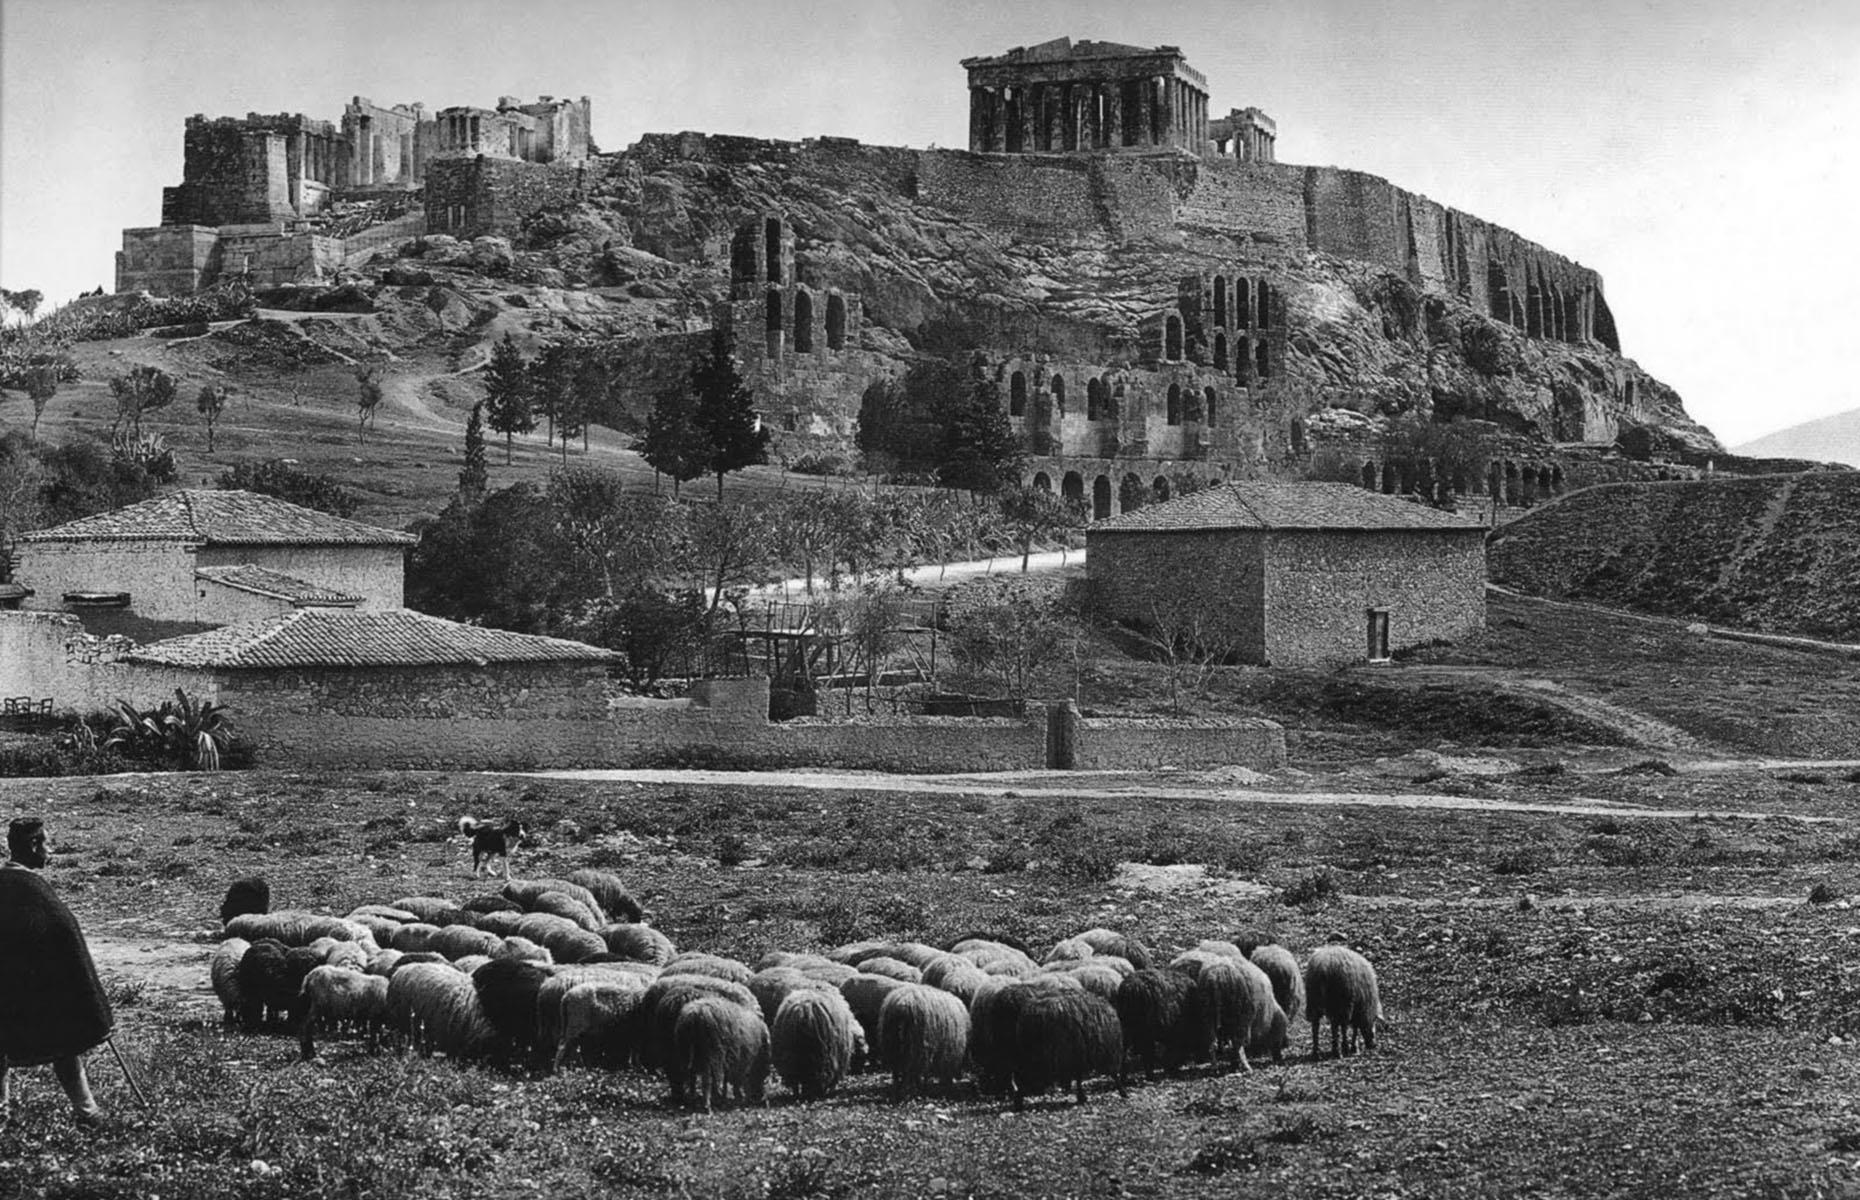 <p>Frederic Boissonnas was a Swiss photographer who fell in love with Greece and its people and made it his life’s work to capture the country on film. He made several trips to the mainland and islands between 1903 and 1933. The images he took, like this one of the Acropolis in Athens snapped in 1903, helped to raise awareness of the country across Europe, effectively kickstarting the Greek tourist industry, and to preserve images of local life and manual labor that would otherwise have been lost to time. </p>